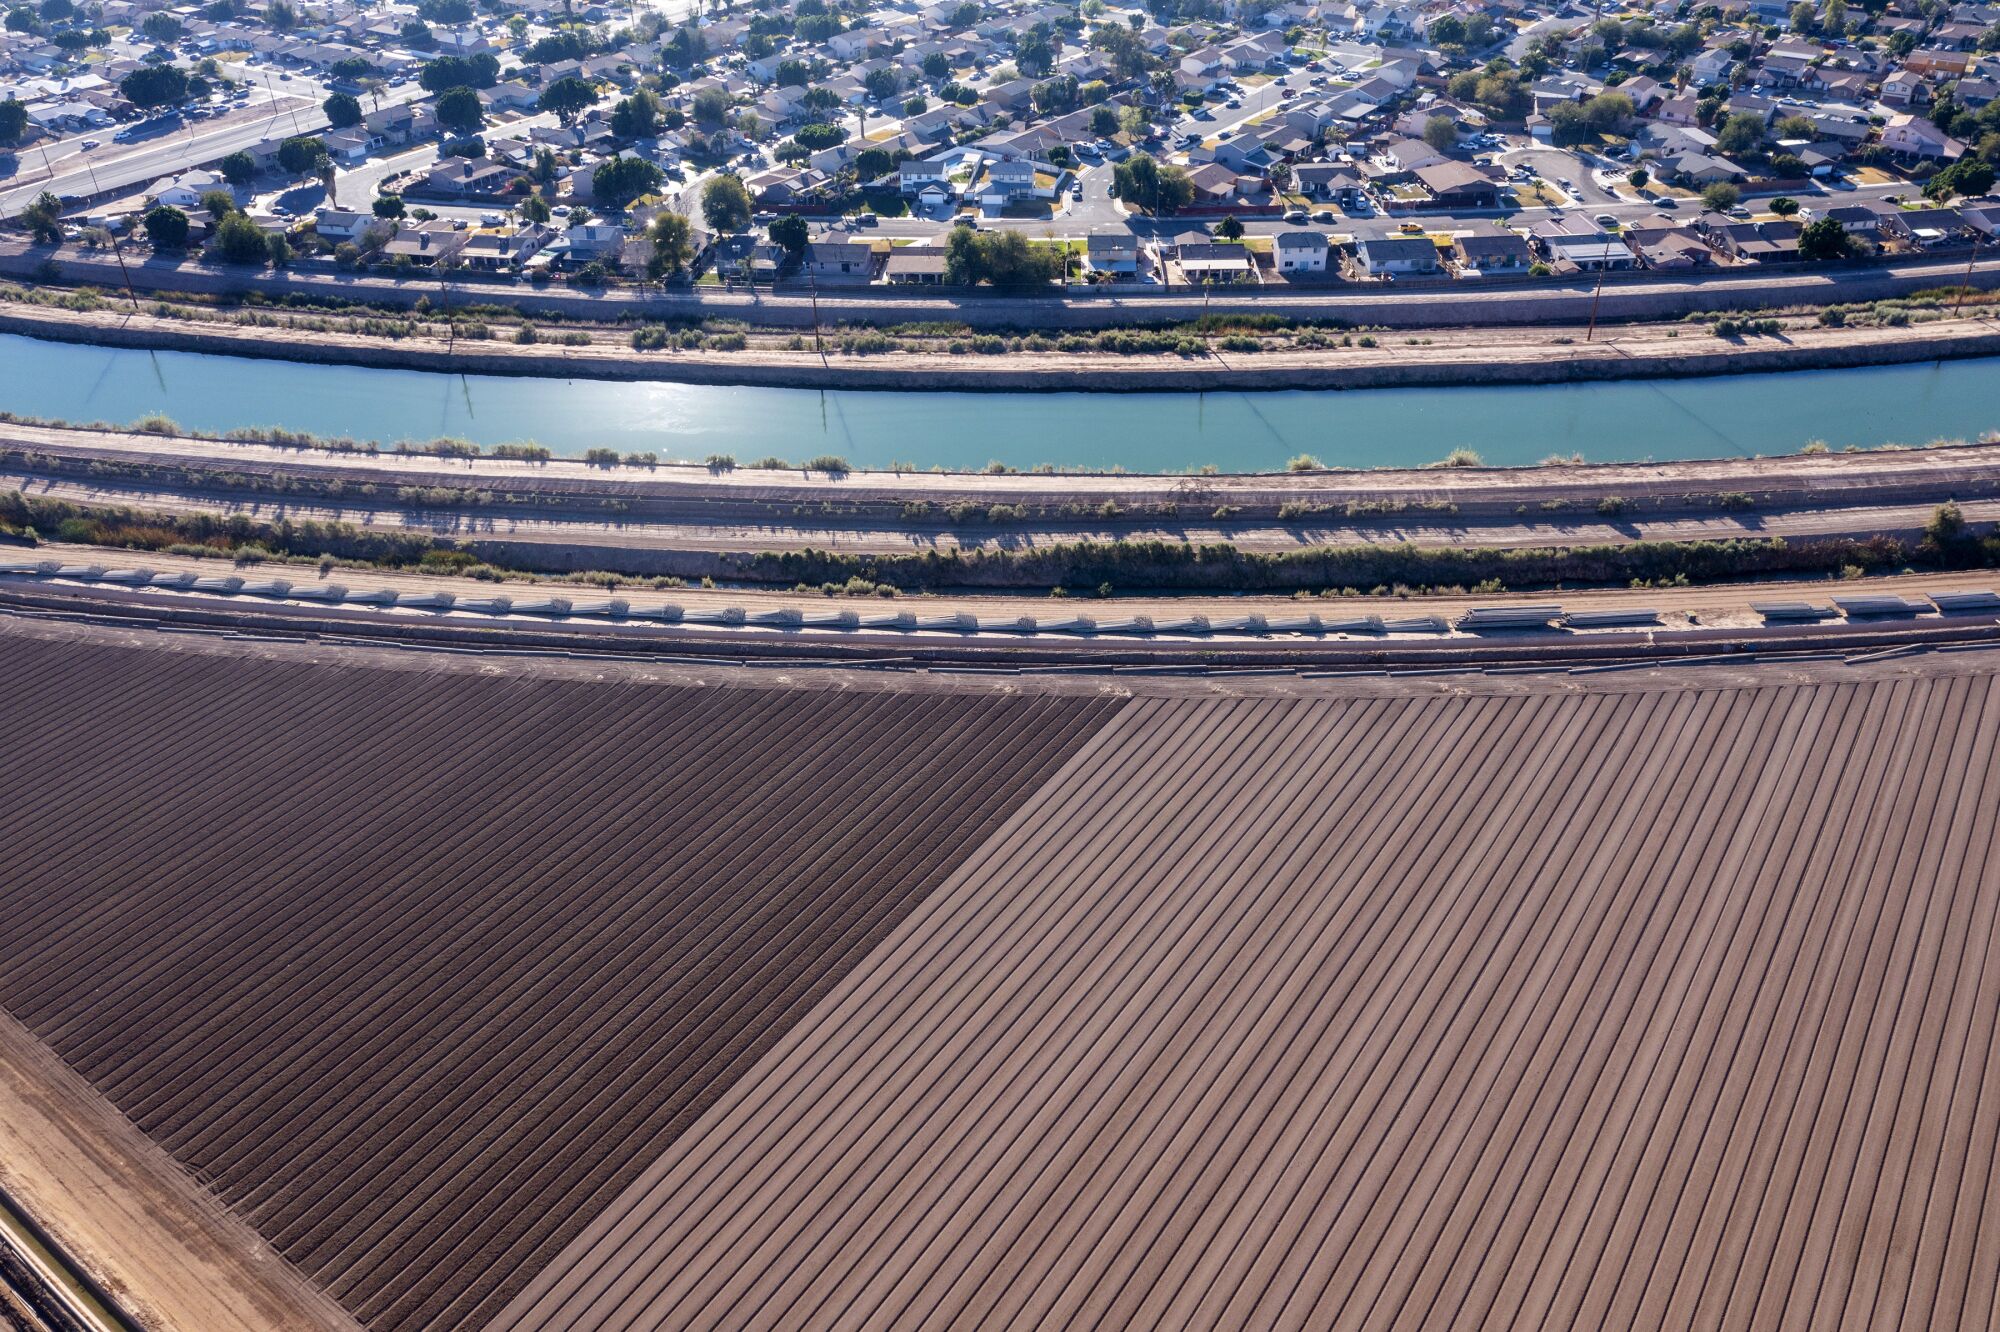 The All-American Canal in Calexico is where suburbia meets agriculture.